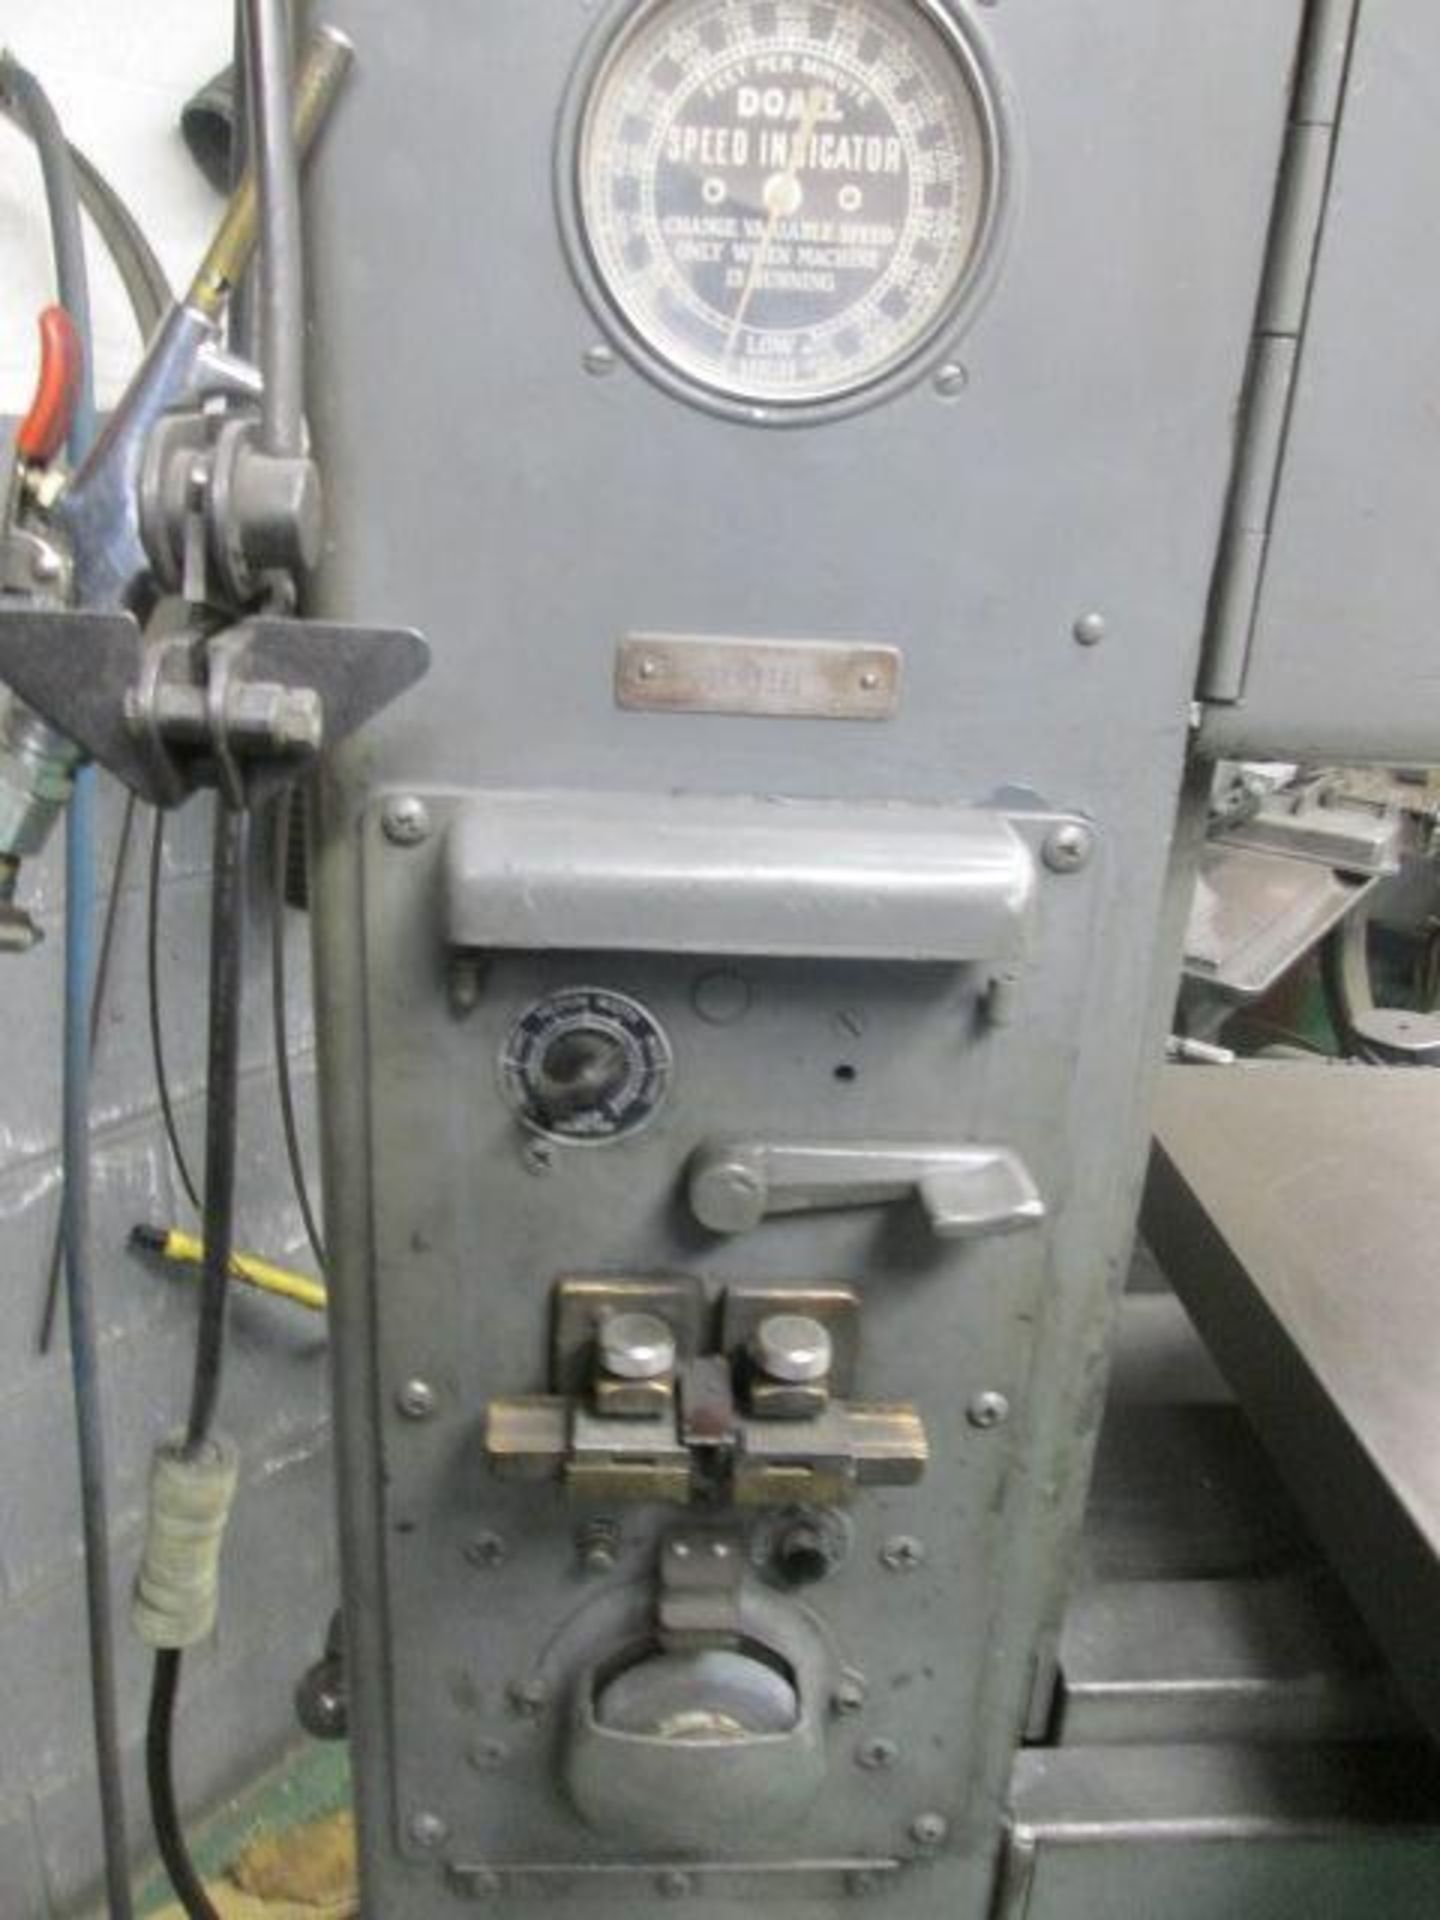 Doall Metal Vertical Contour Saw - Image 5 of 7